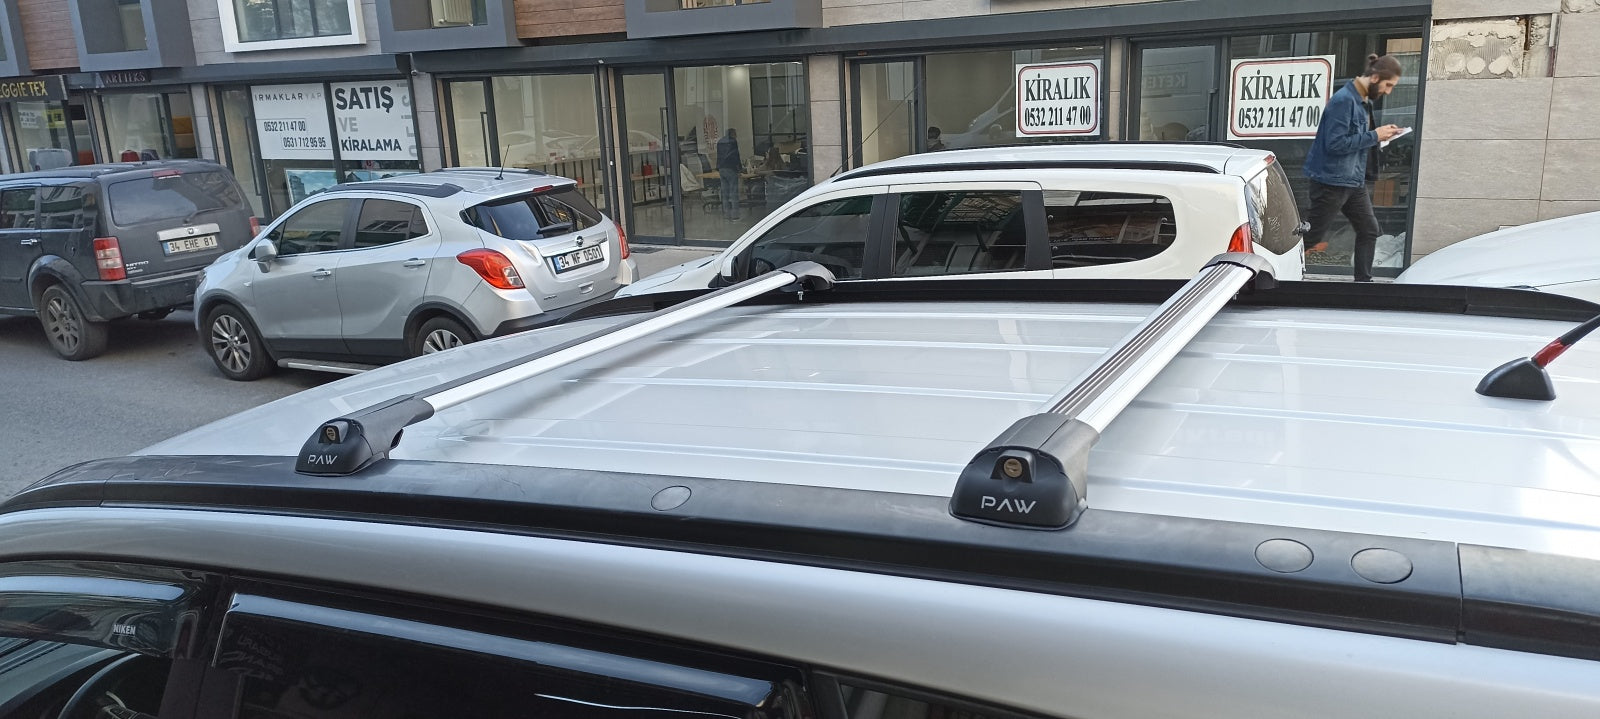 Lada Largus 2012-Up Roof Rack System Carrier Cross Bars Aluminum Lockable High Quality of Metal Bracket Silver-6